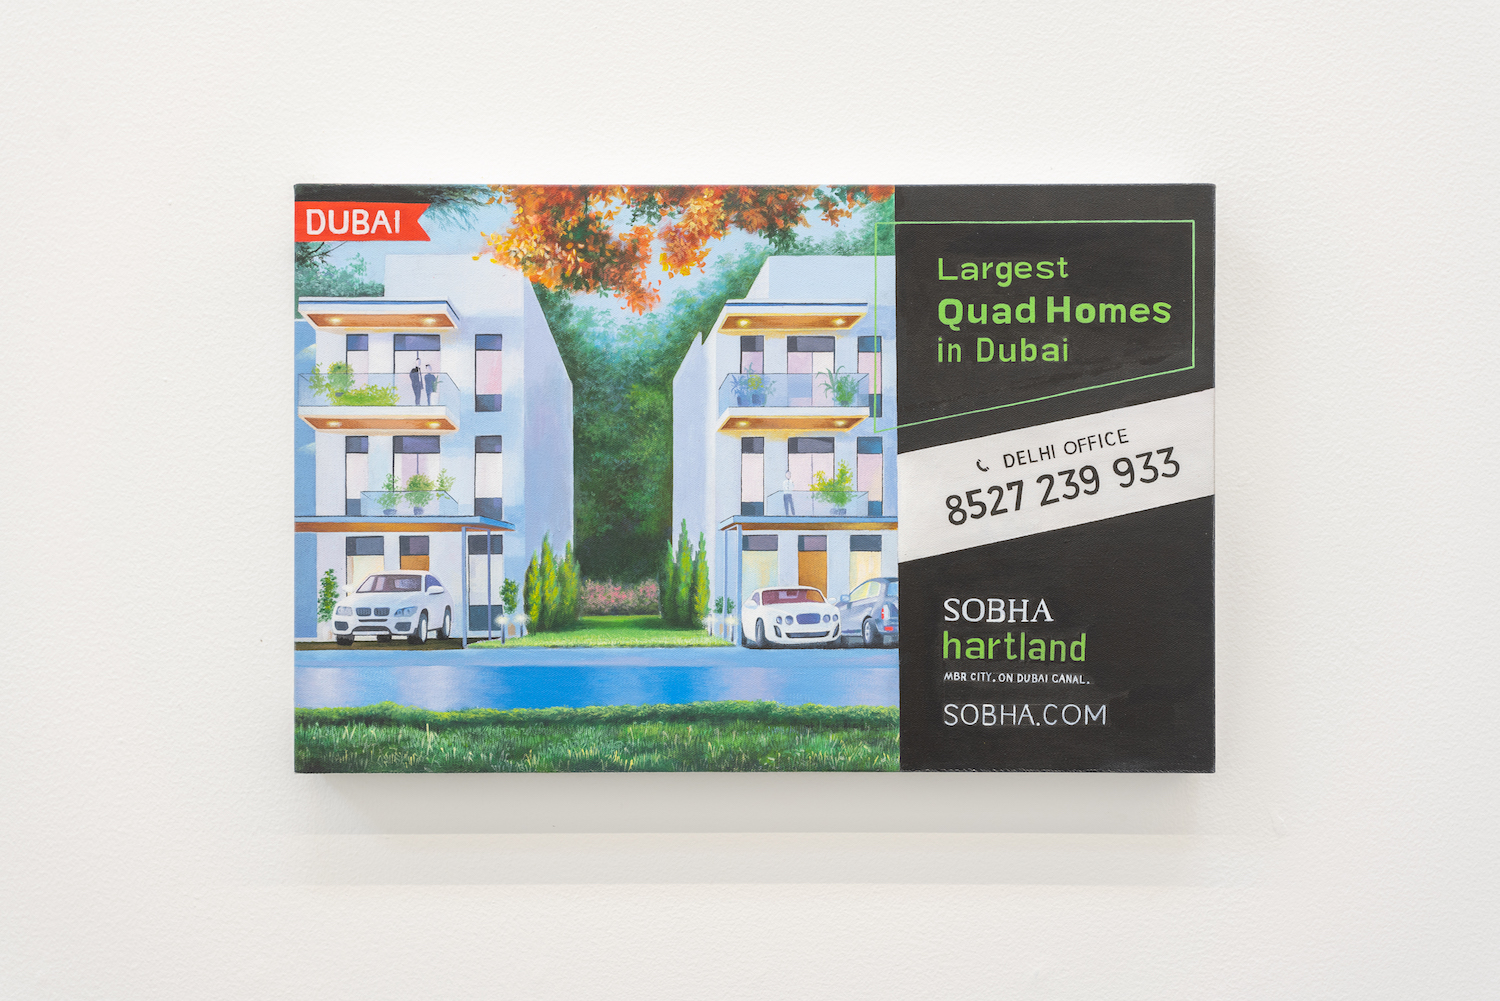  LARGEST QUAD HOMES IN DUBAI 2018 Oil on canvas Painting of a billboard in Delhi advertising real estate investment opportunity 36.4 x 56.9 cm 